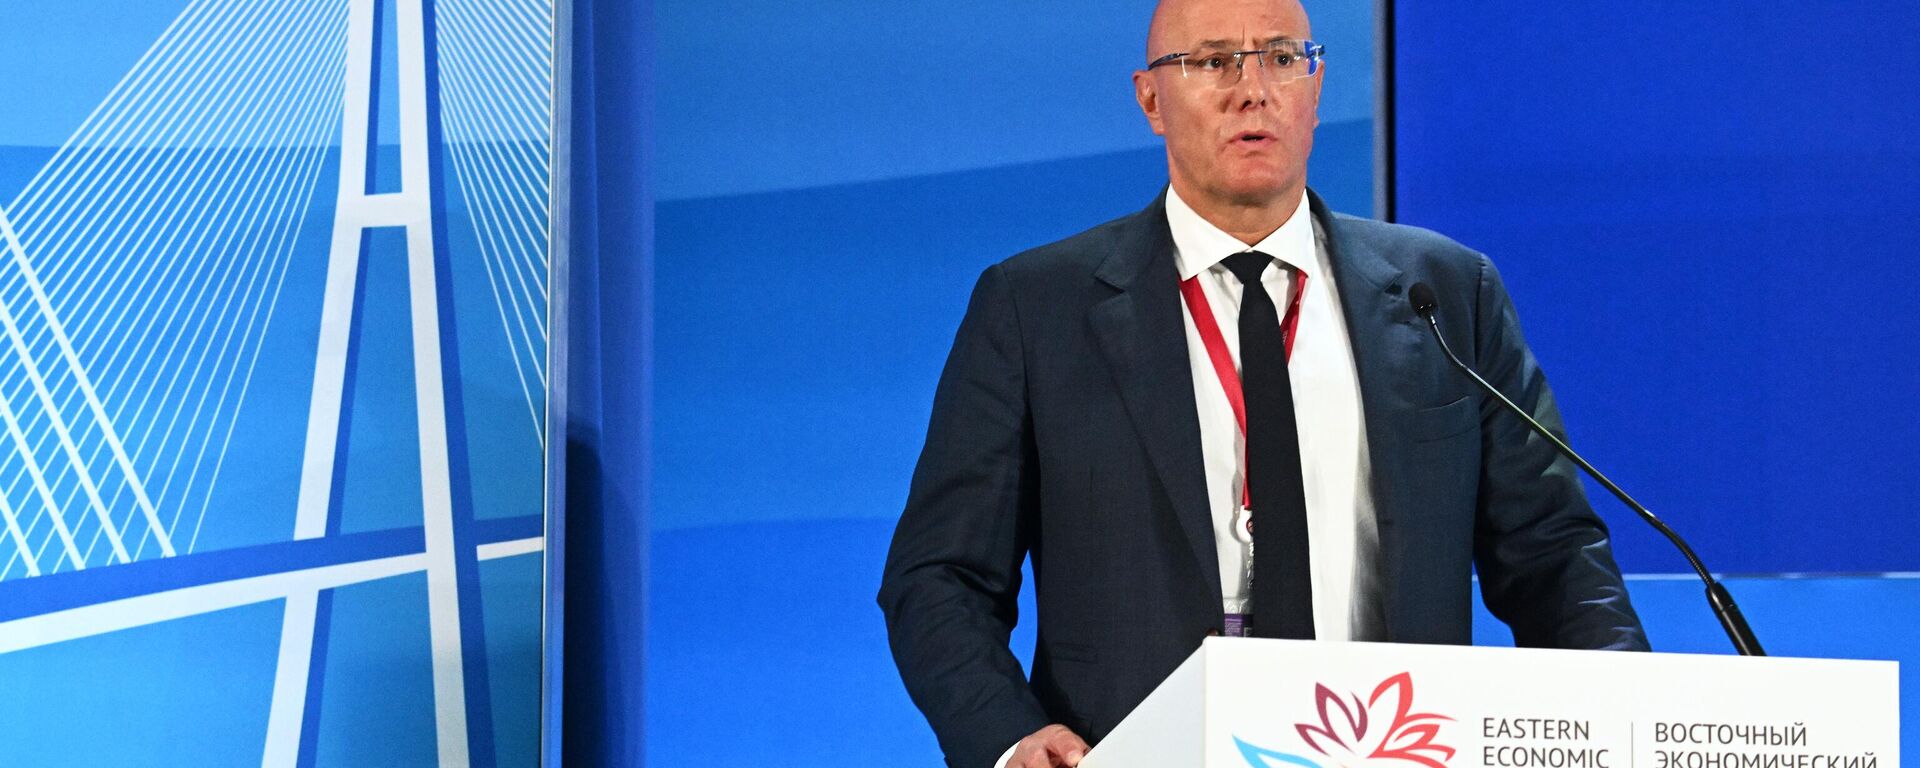 Dmitry Chernyshenko, Deputy Prime Minister of the Russian Federation, speaks at the session East of Russia 2.0! Regional Drivers of Digital Development in the New Reality at the Eastern Economic Forum (EEF) in Vladivostok - Sputnik International, 1920, 28.03.2023